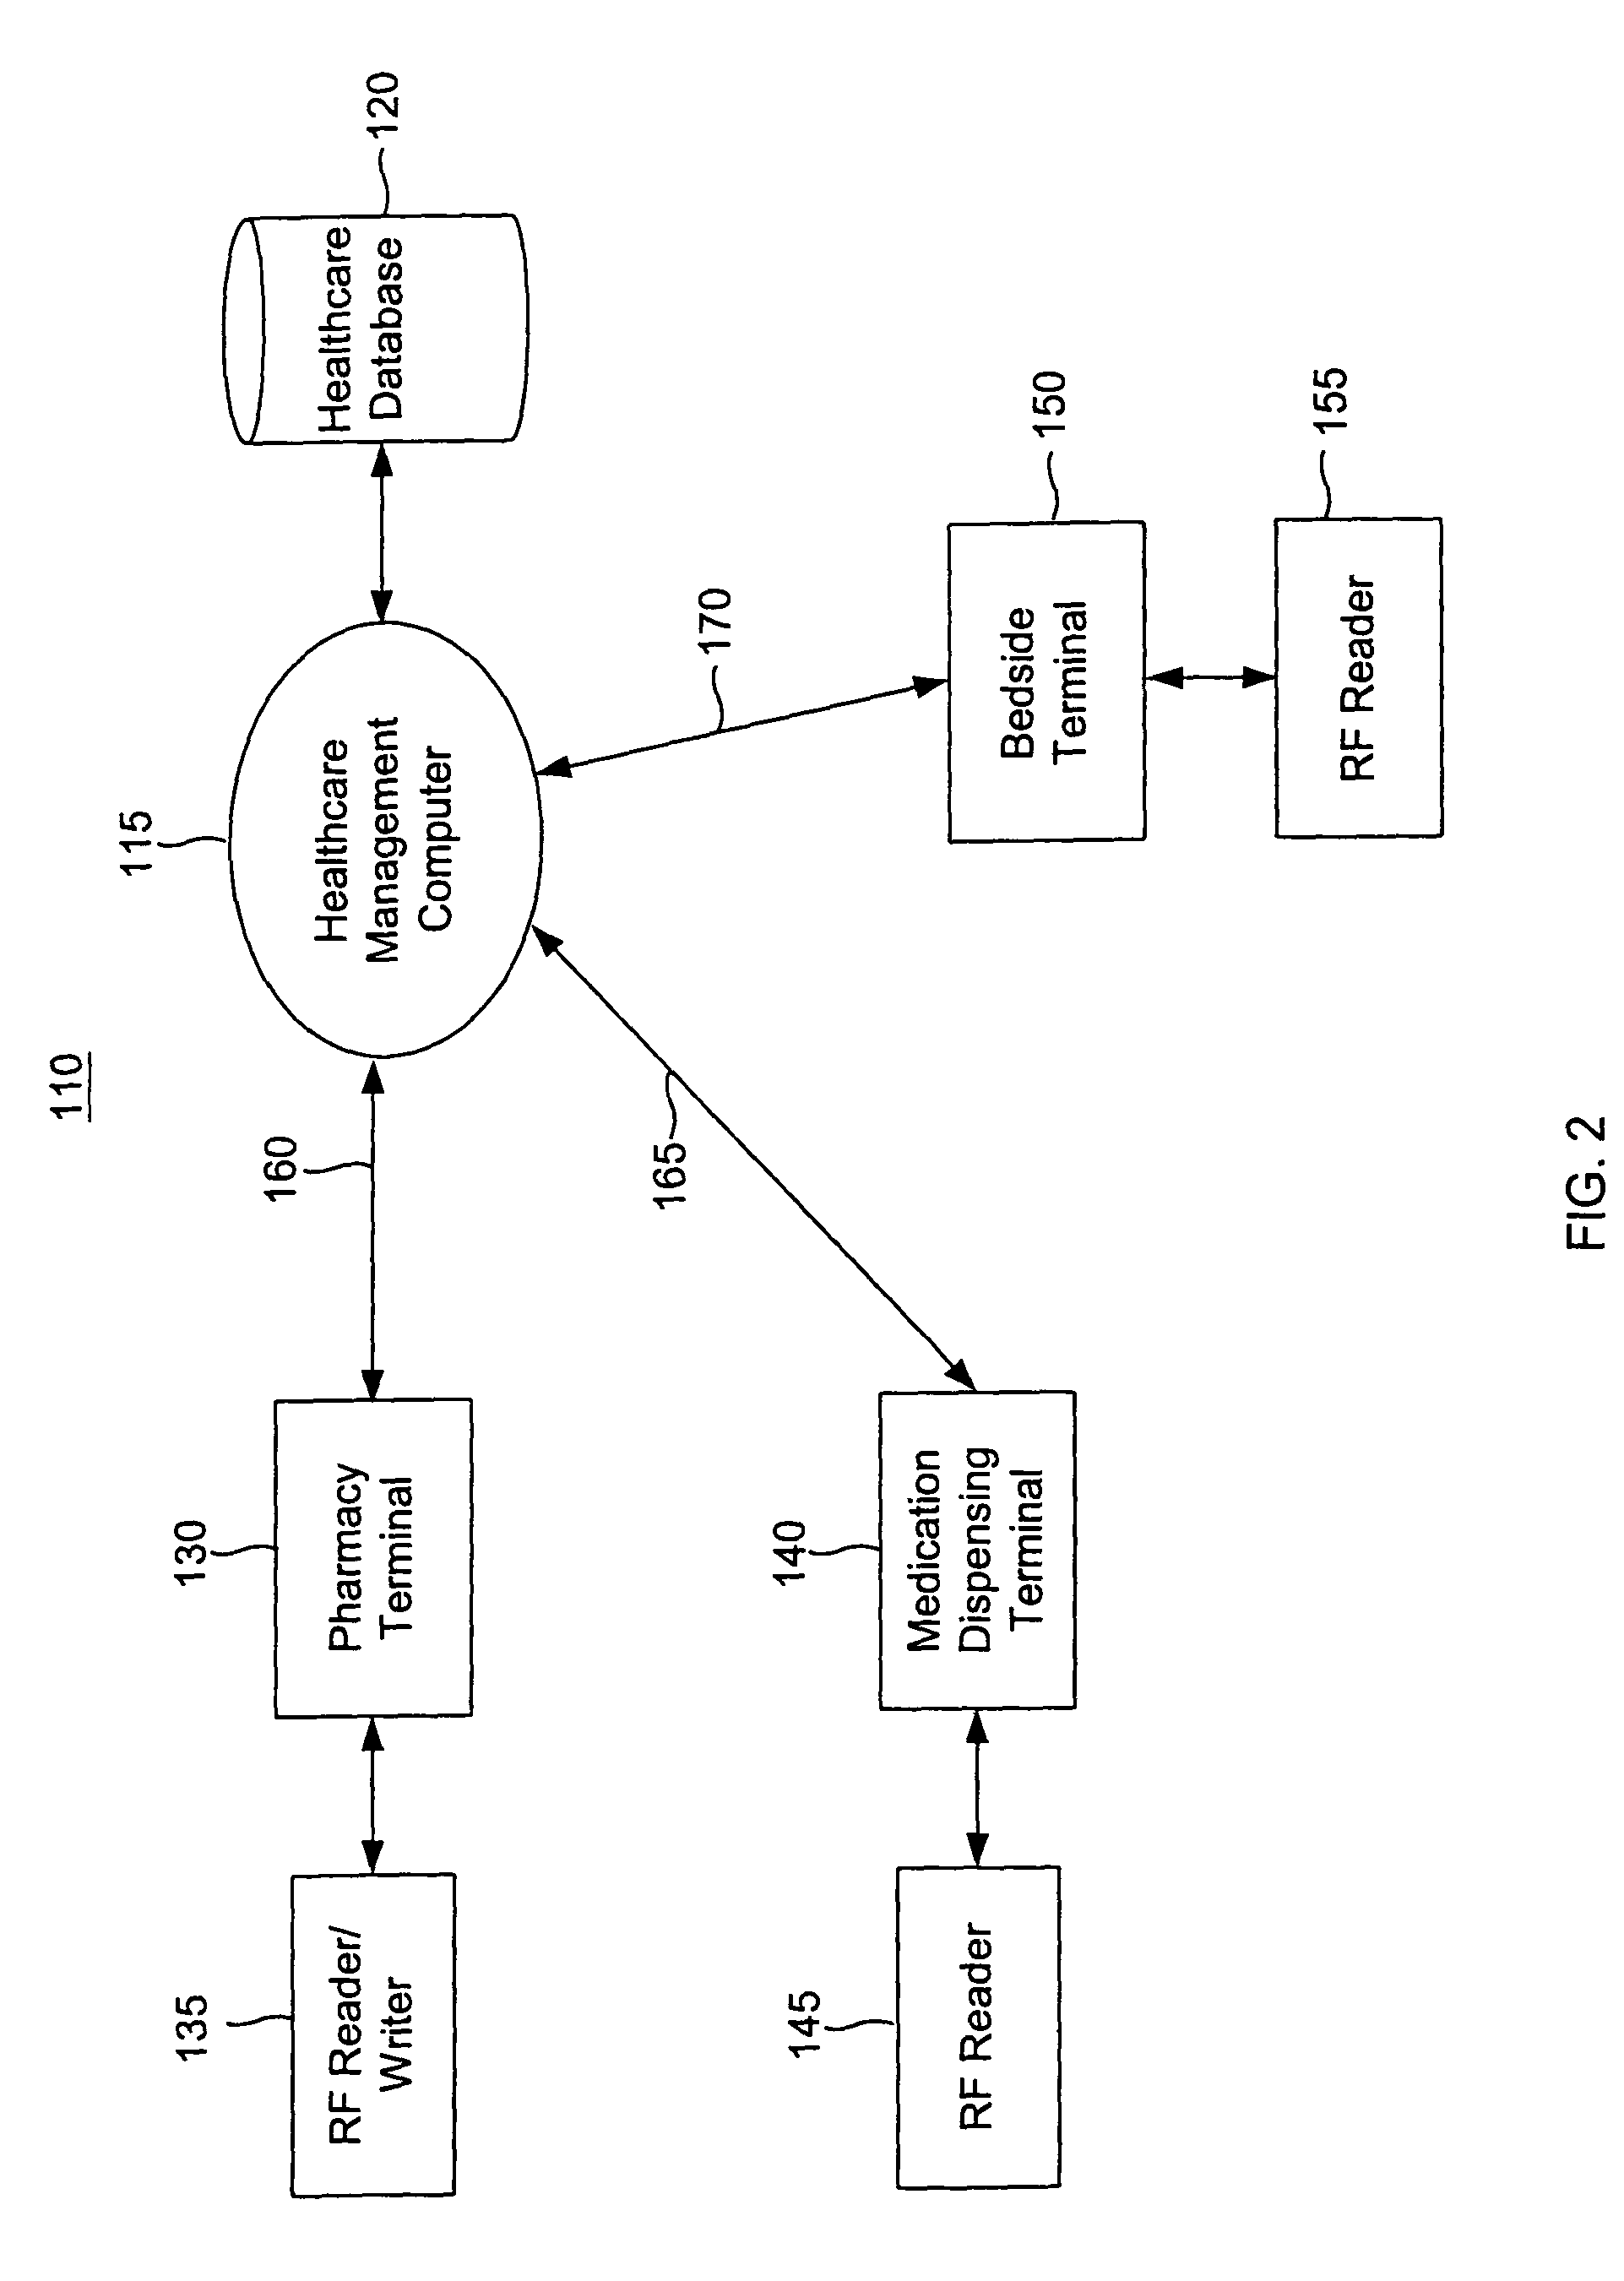 Systems and methods for tracking pharmaceuticals within a facility